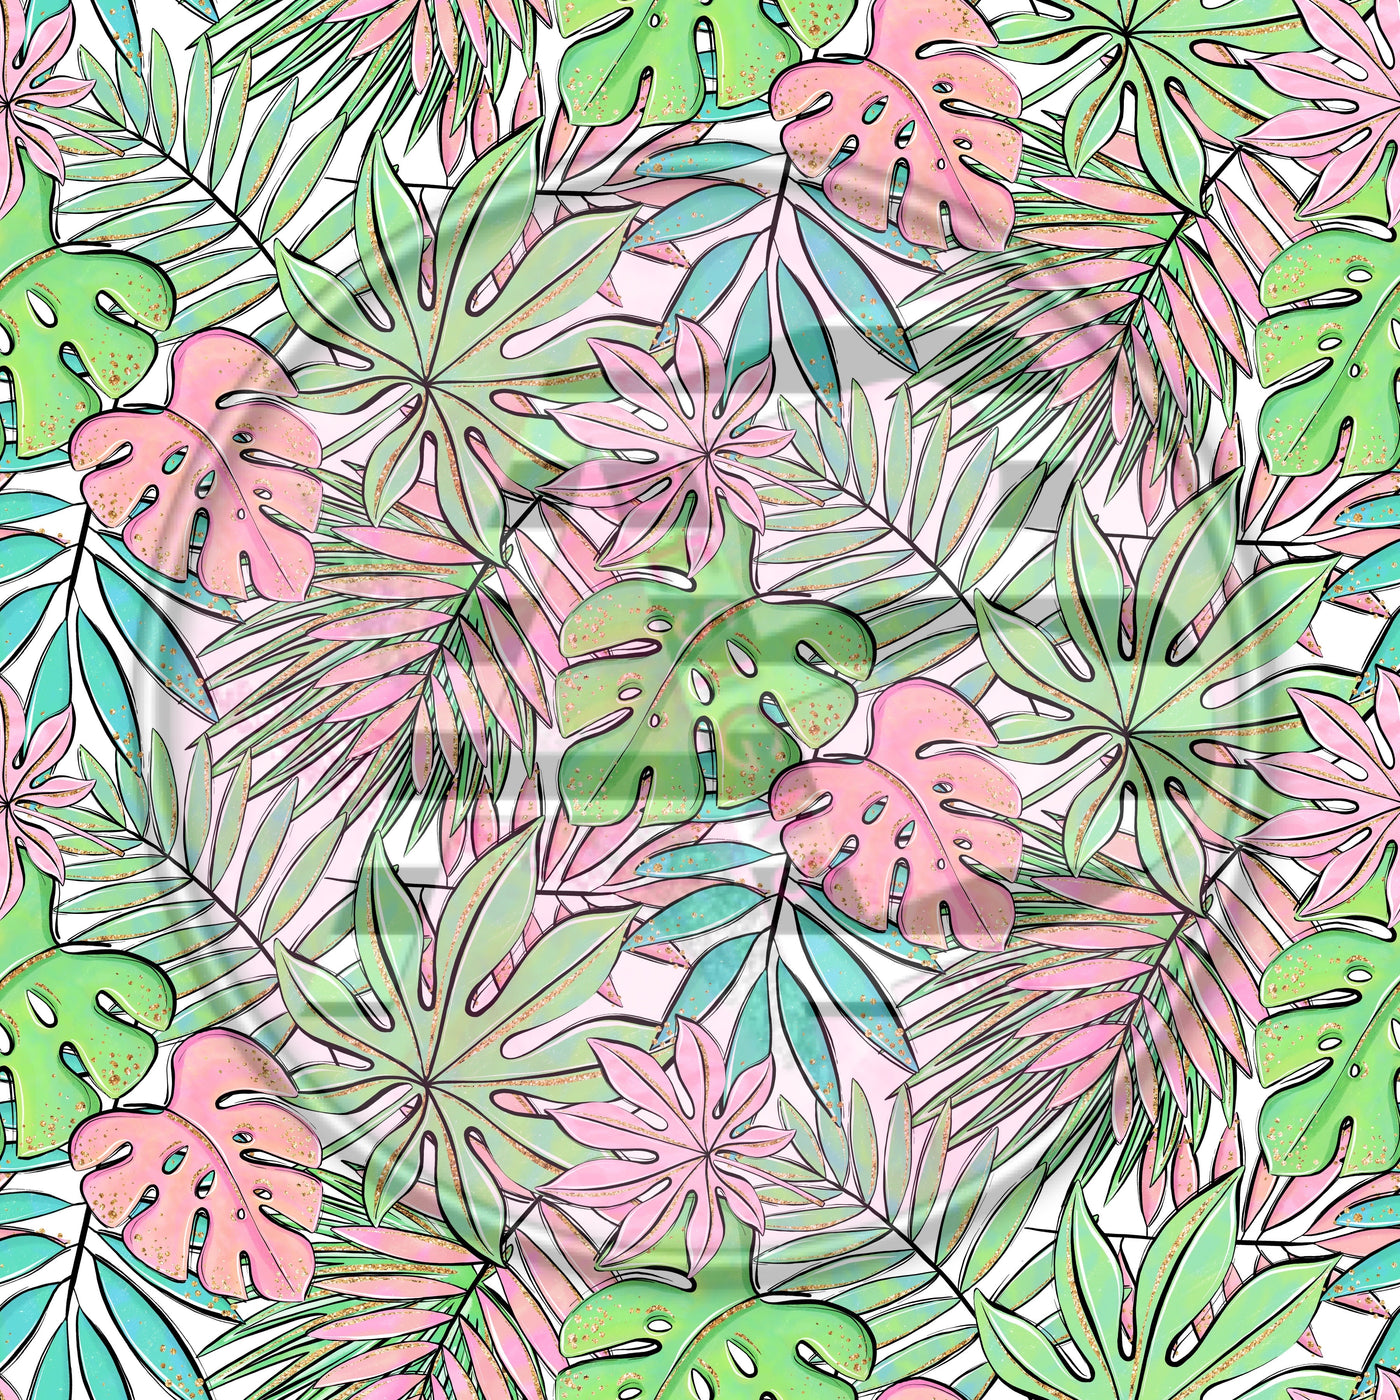 Adhesive Patterned Vinyl - Tropical 702